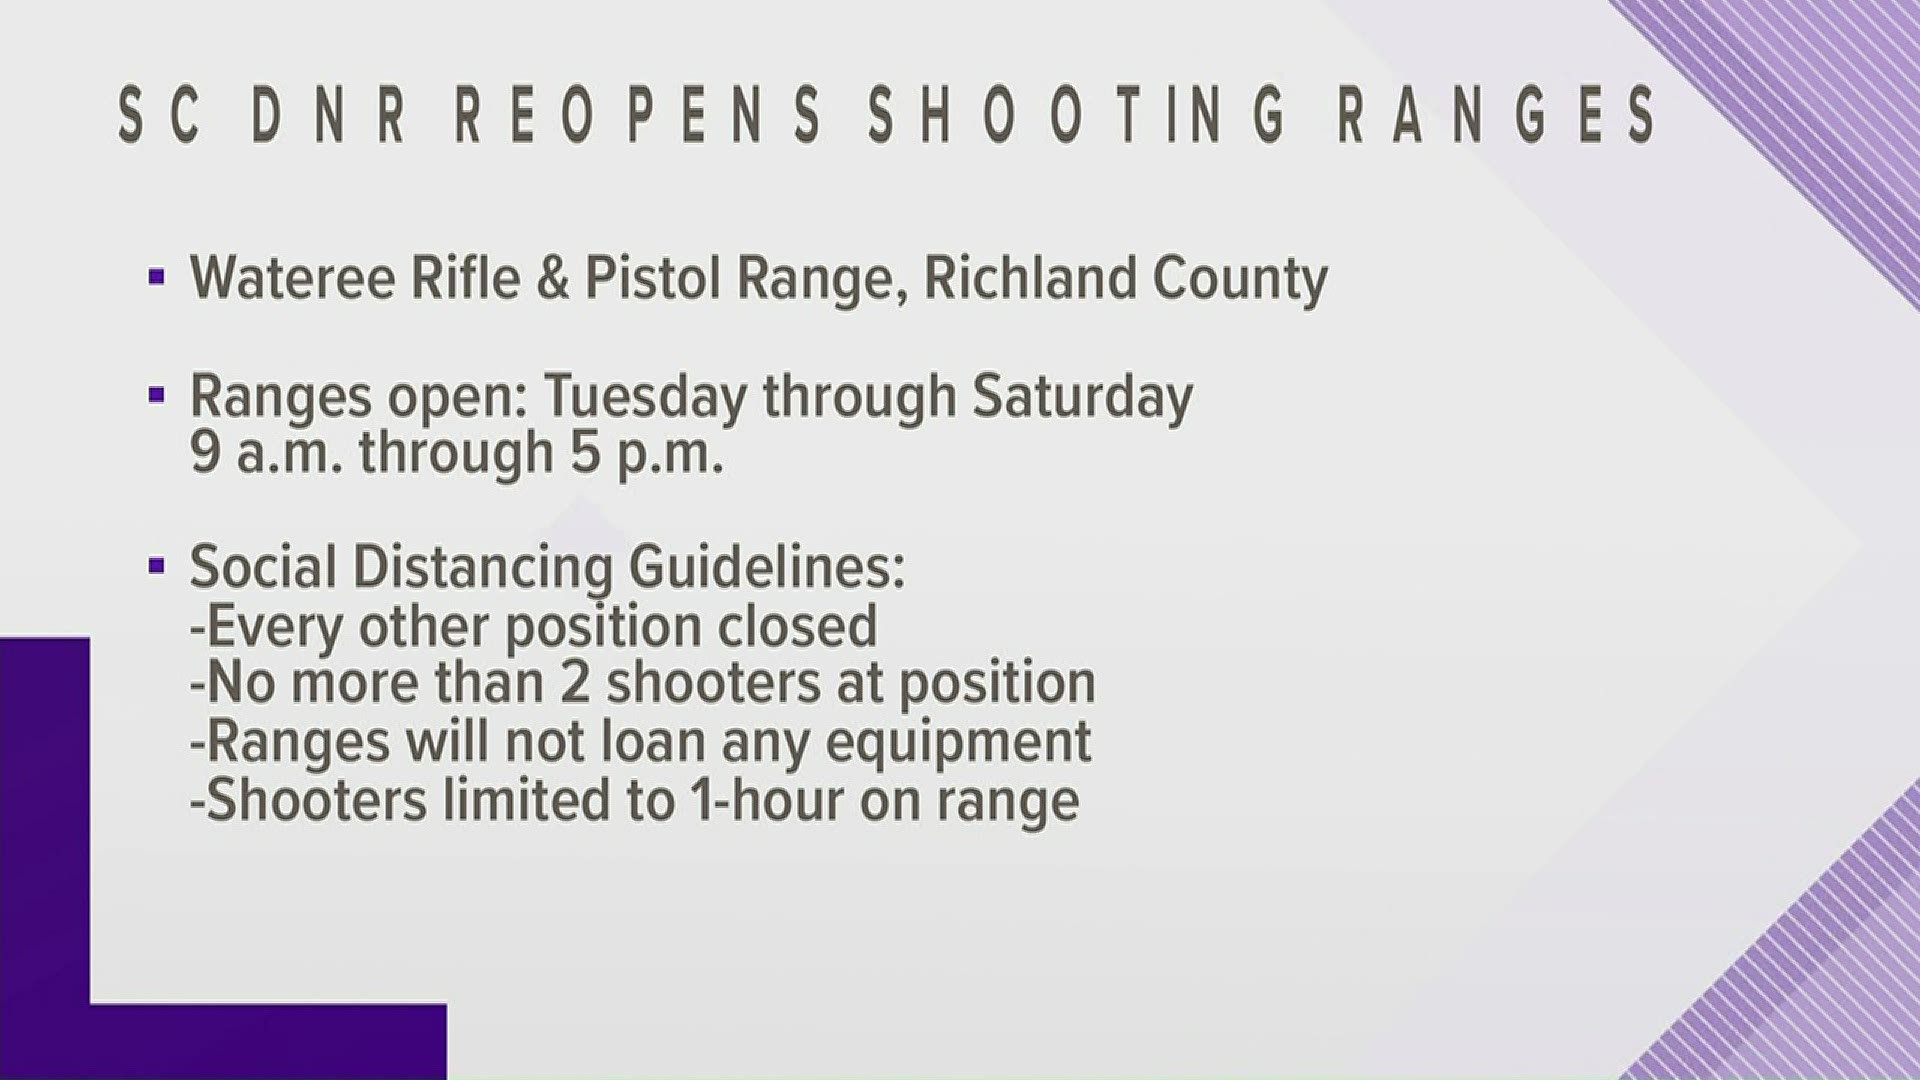 South Carolina's natural resources department is reopening some of its shooting ranges.